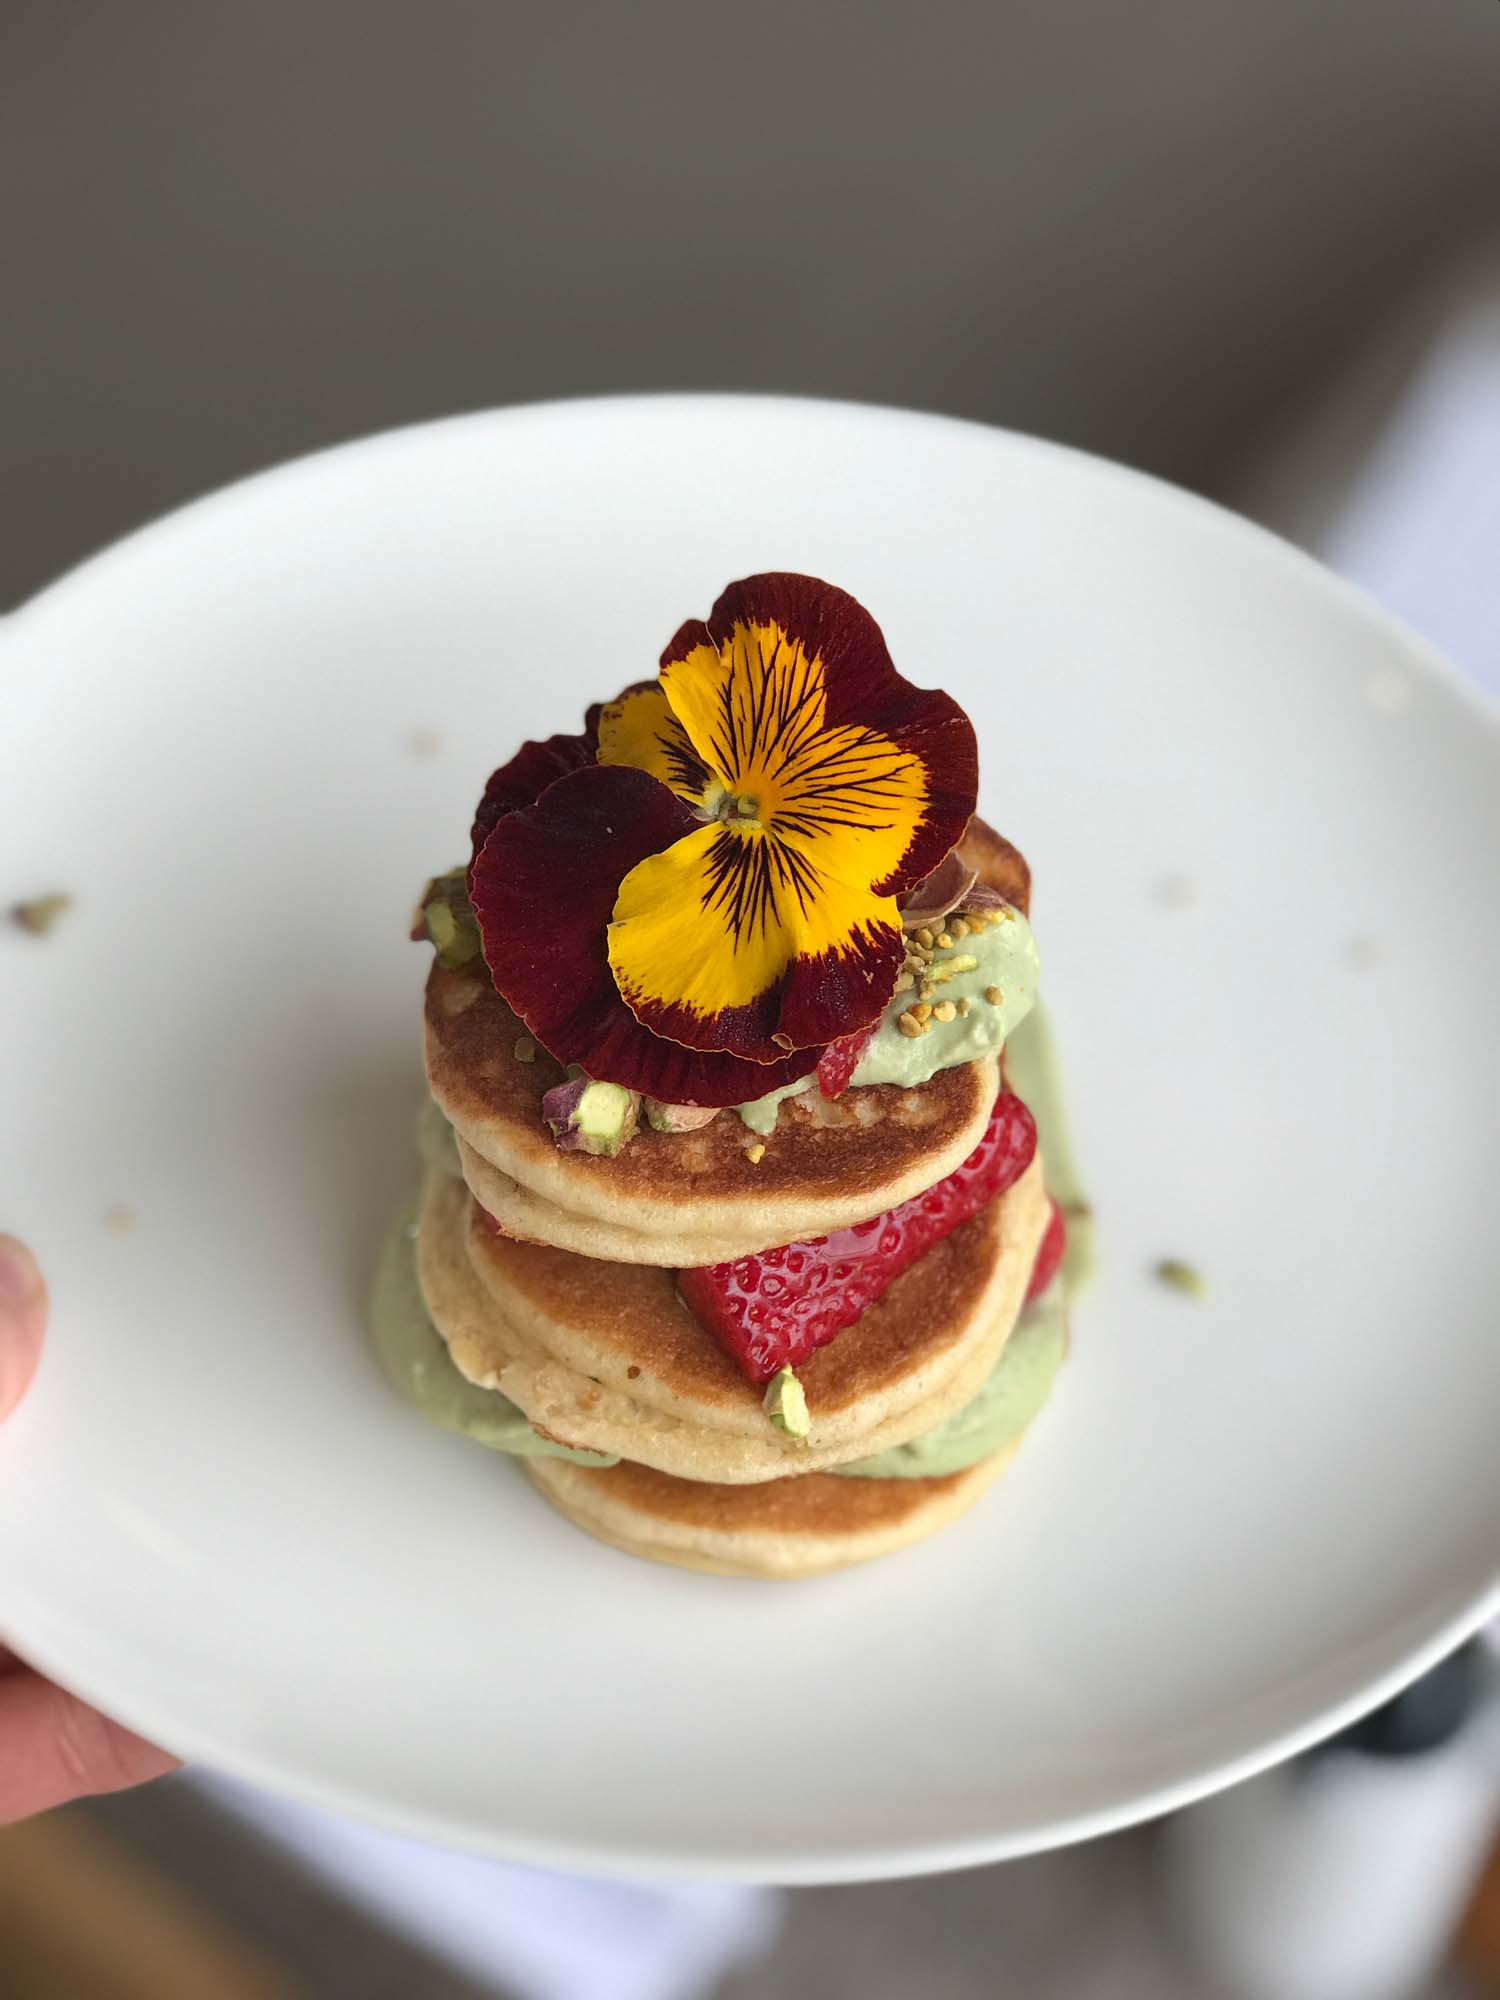 Ben's dairy-free and delicious almond pancakes with matcha cream and strawberries